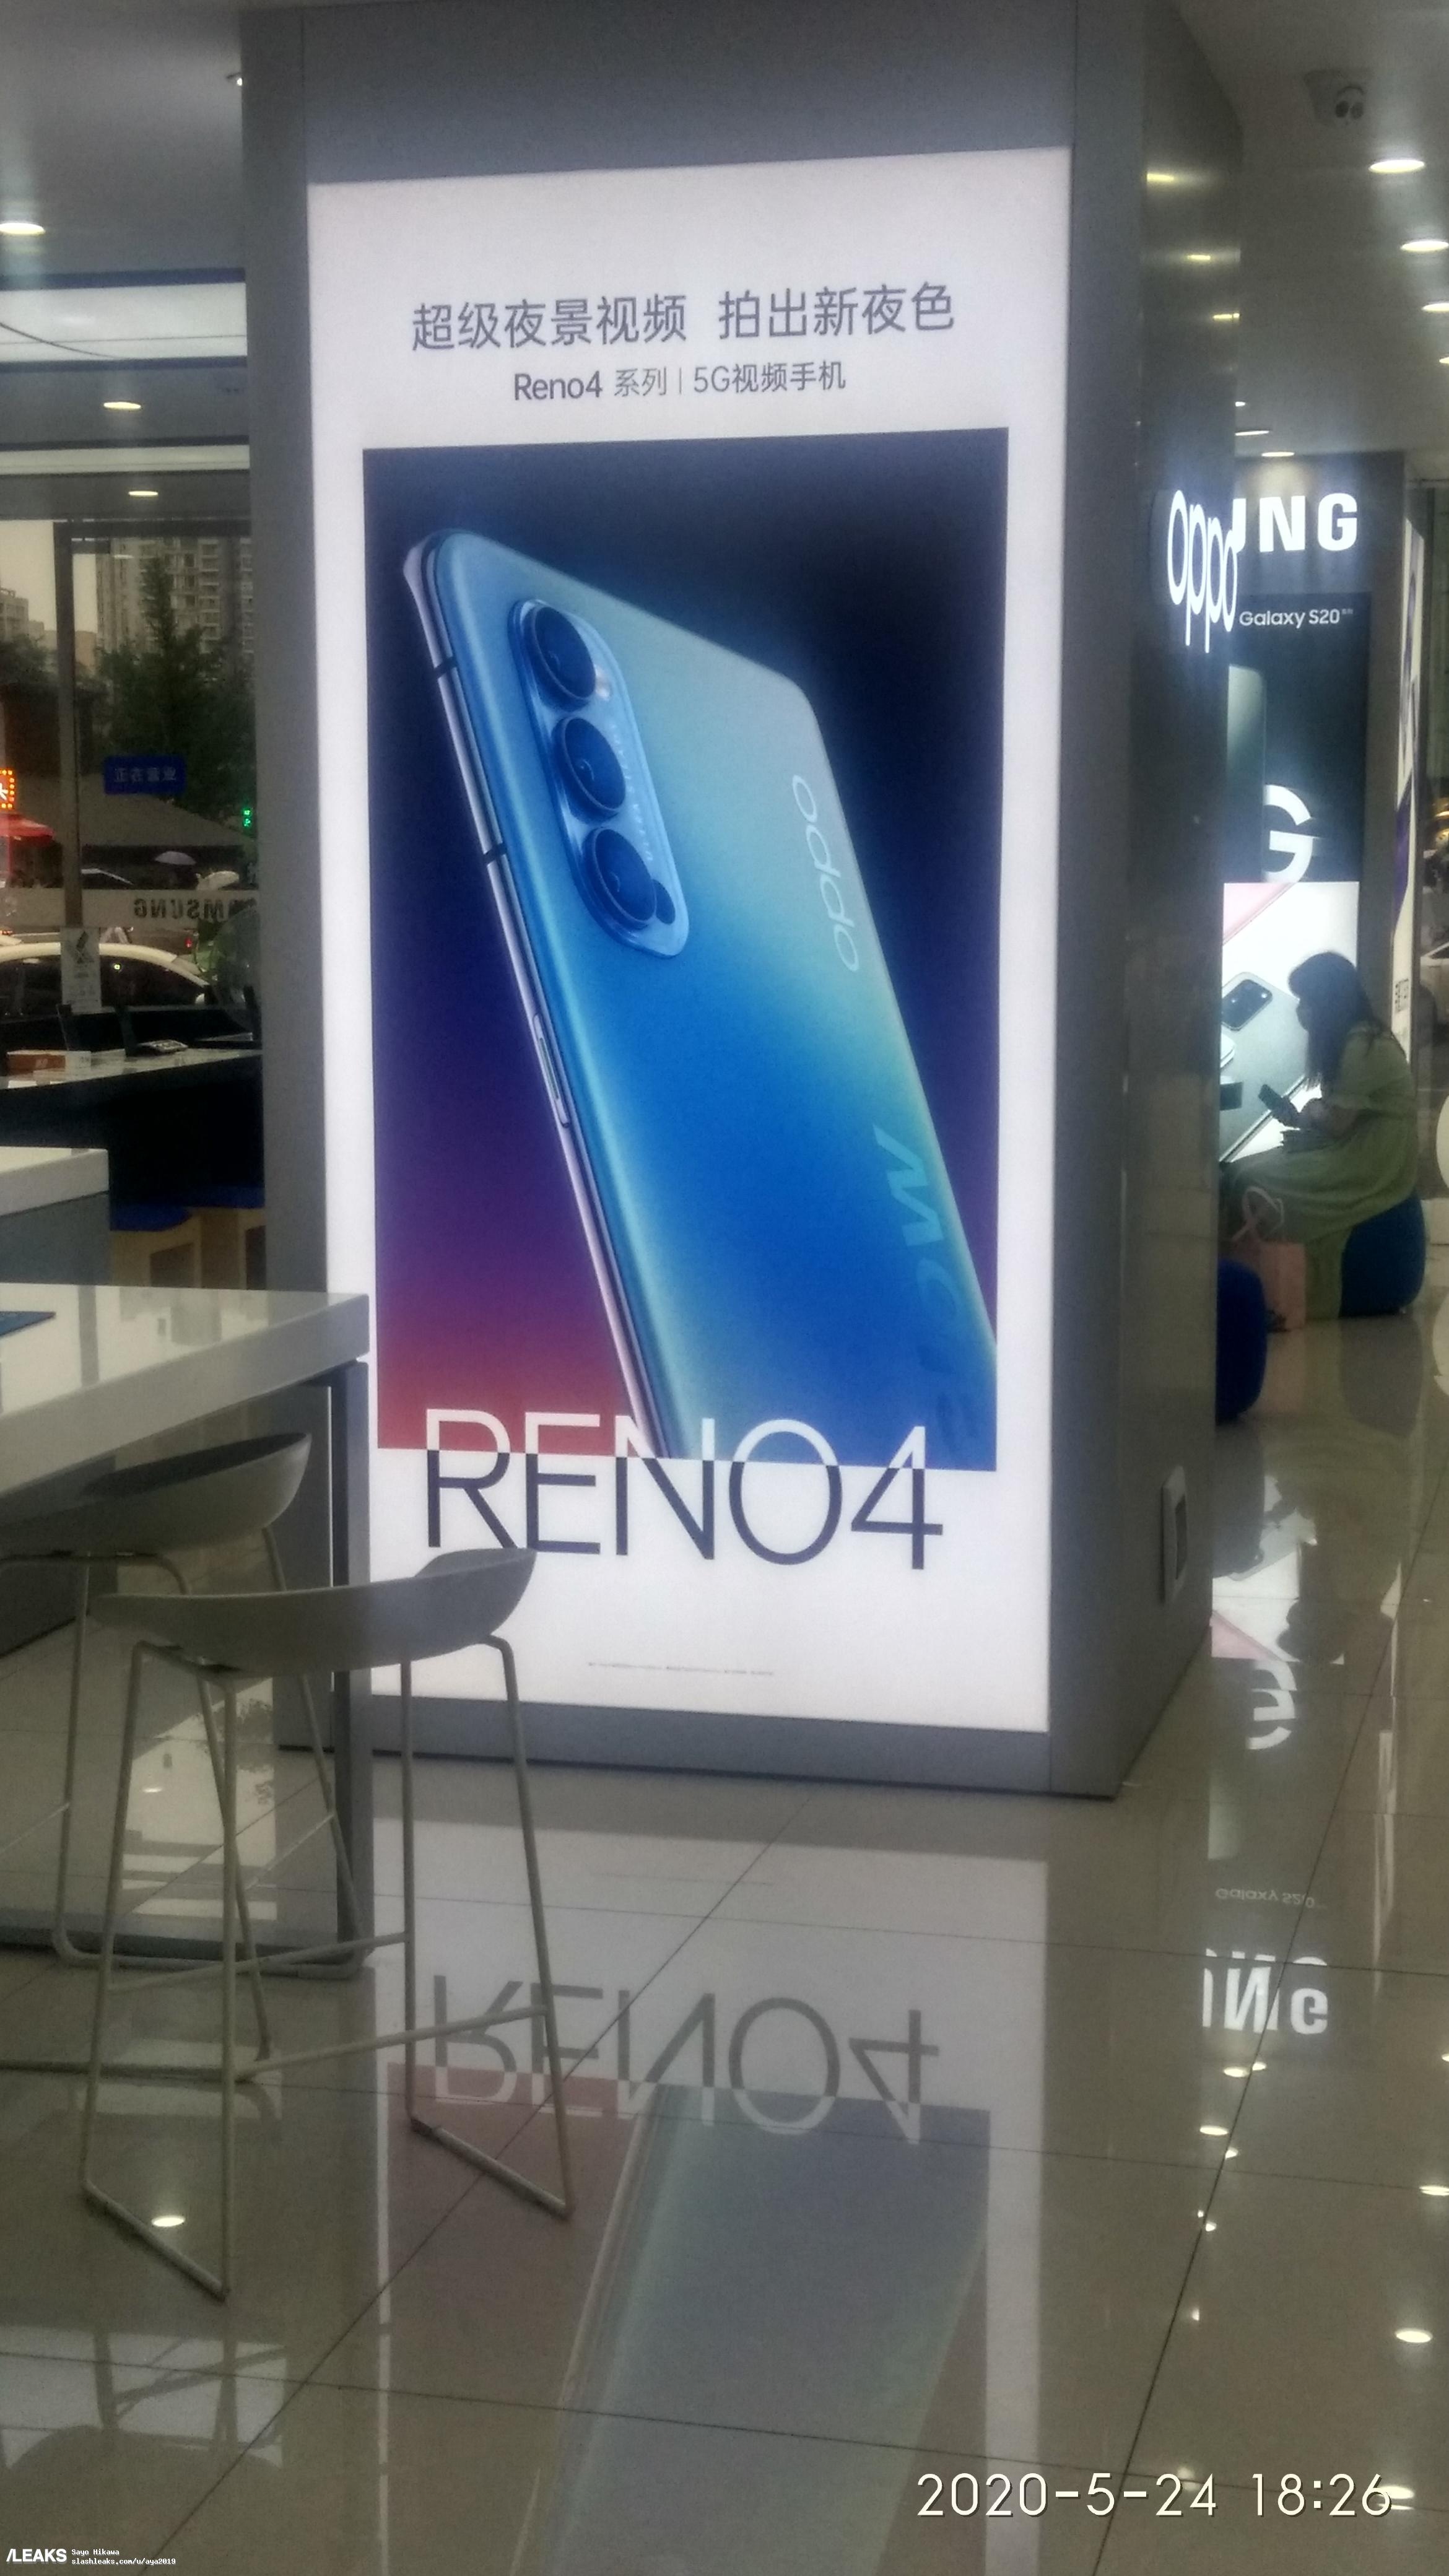 https://www.androidworld.it/wp-content/uploads/2020/05/oppo-reno-4-pro-poster.png